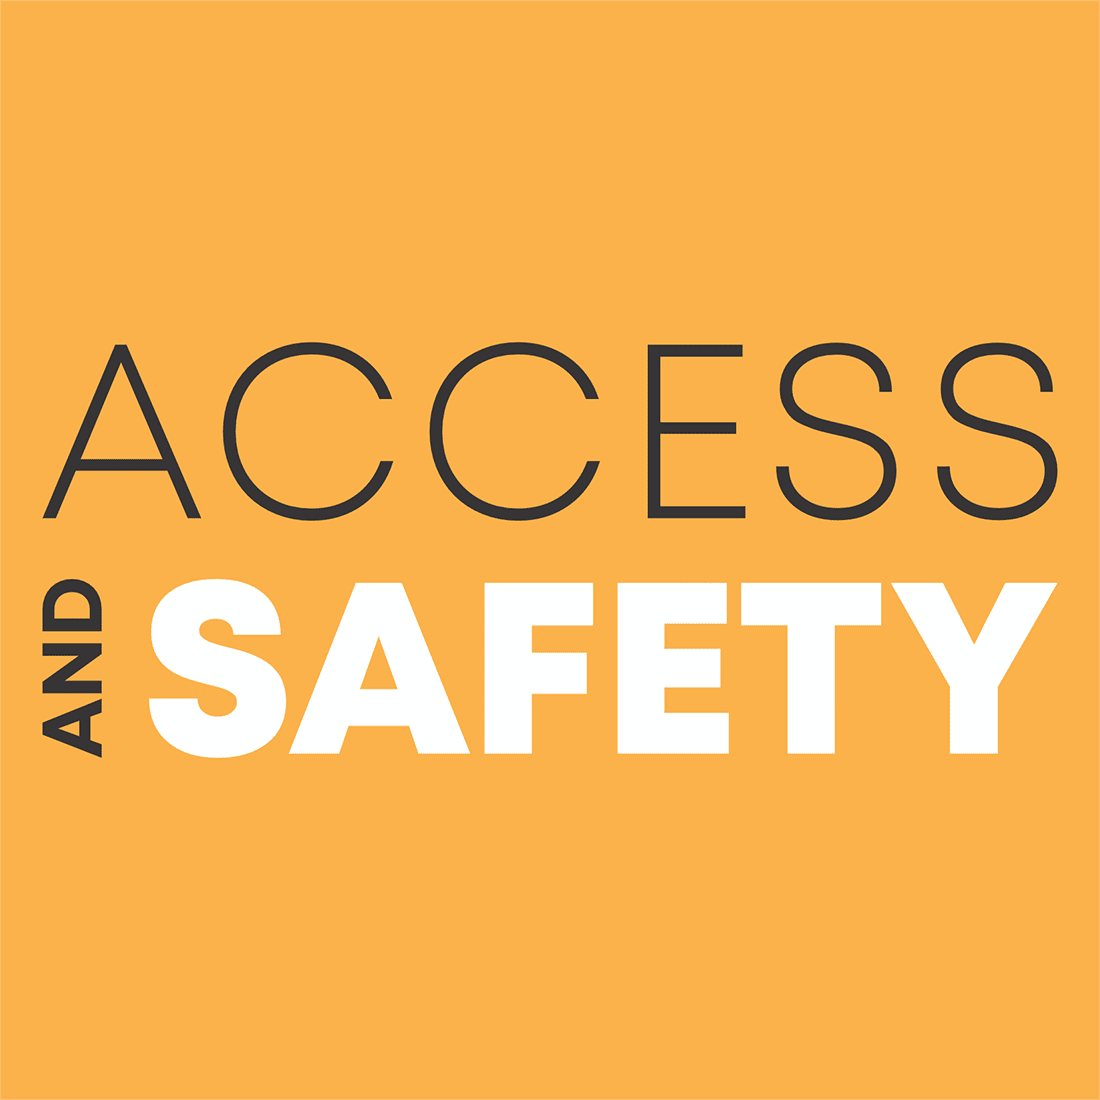 Access and Safety